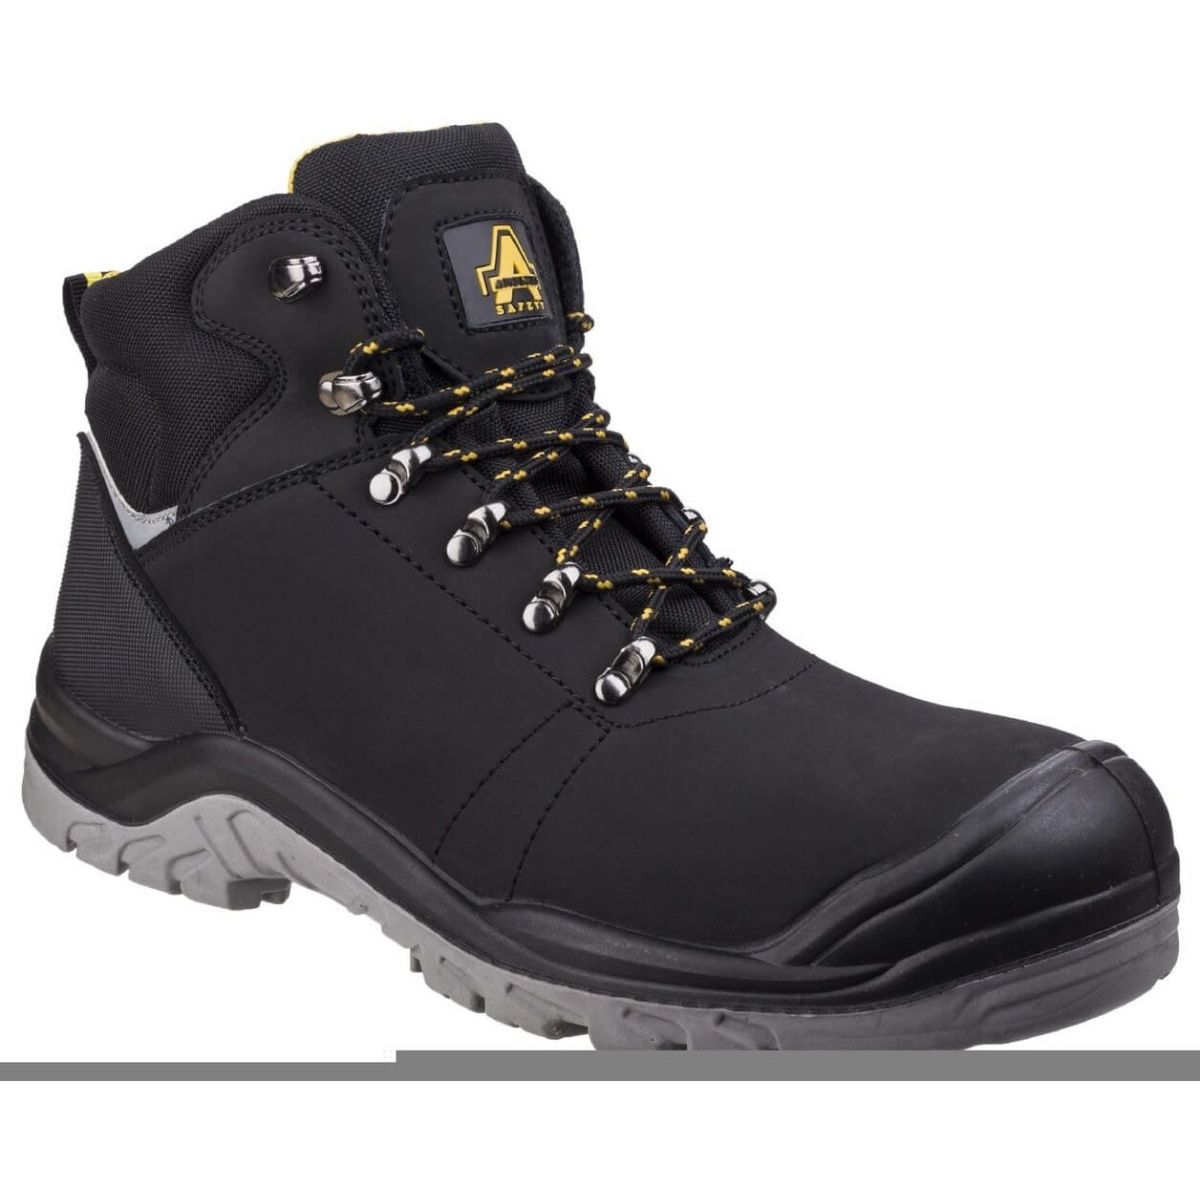 Amblers As252 Water-Resistant Leather Safety Boots Womens - workweargurus.com